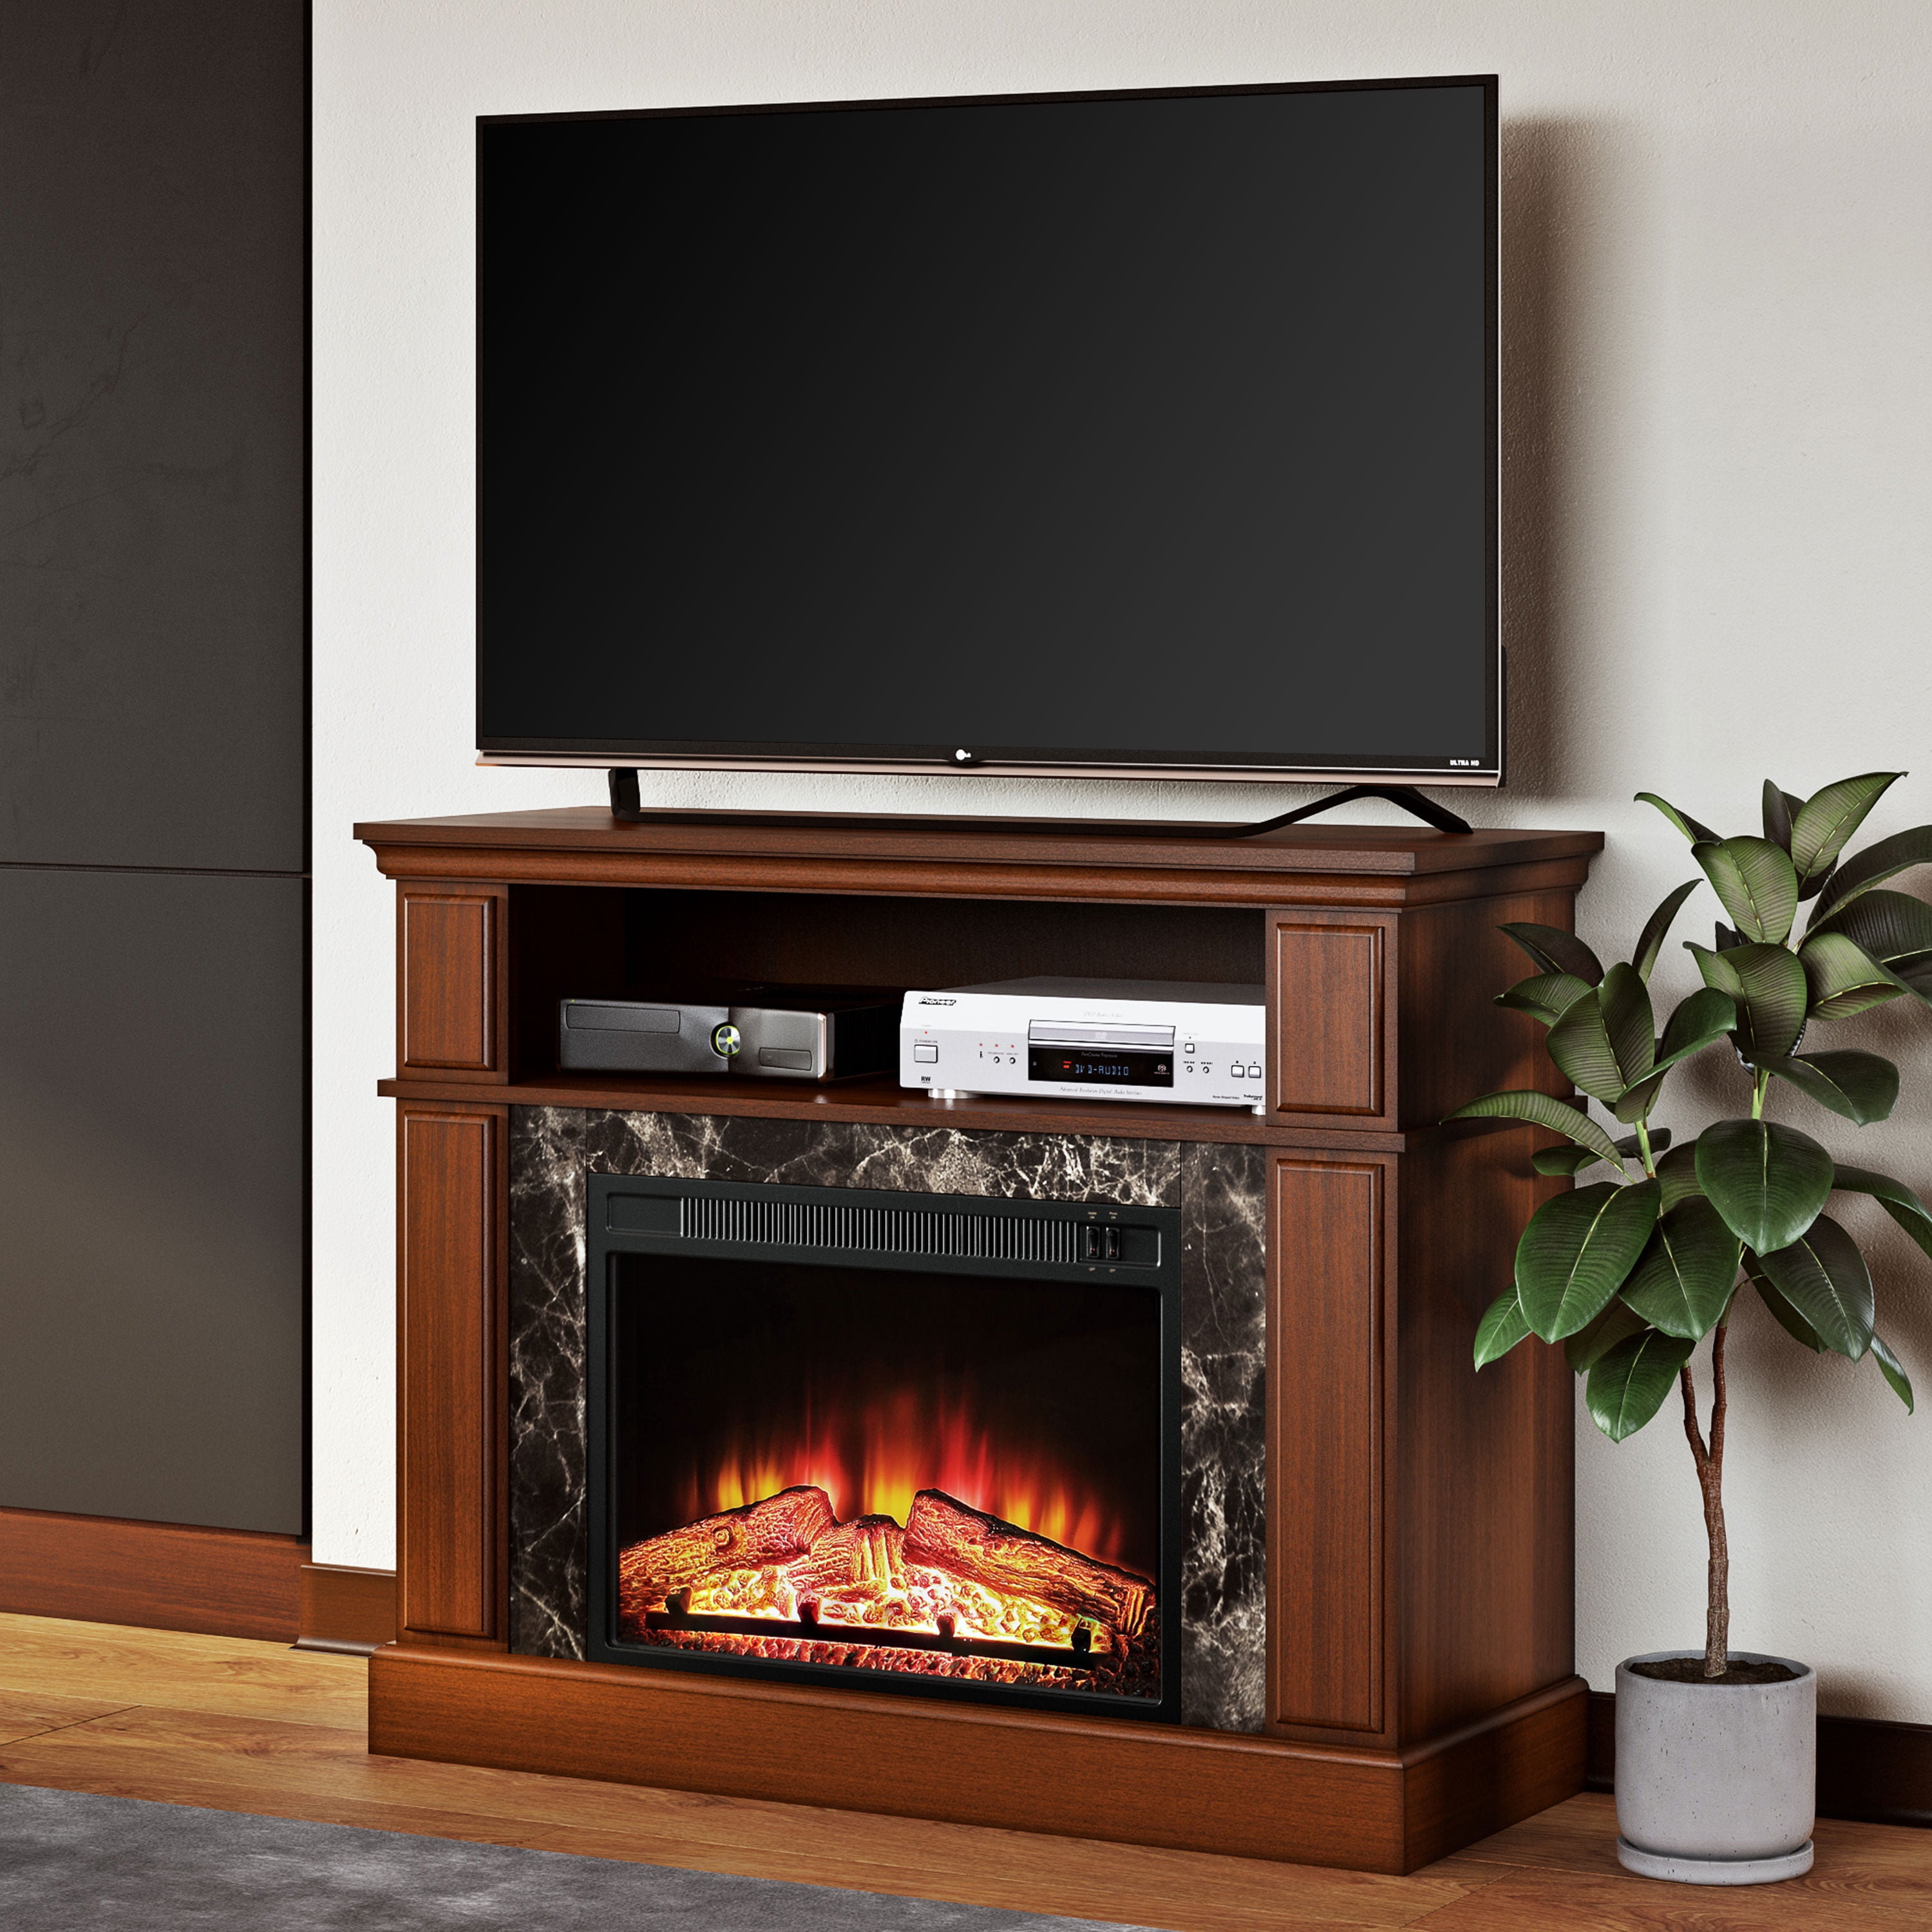 Mainstays Loring Media Fireplace For, Media Consoles With Fireplace Inserts